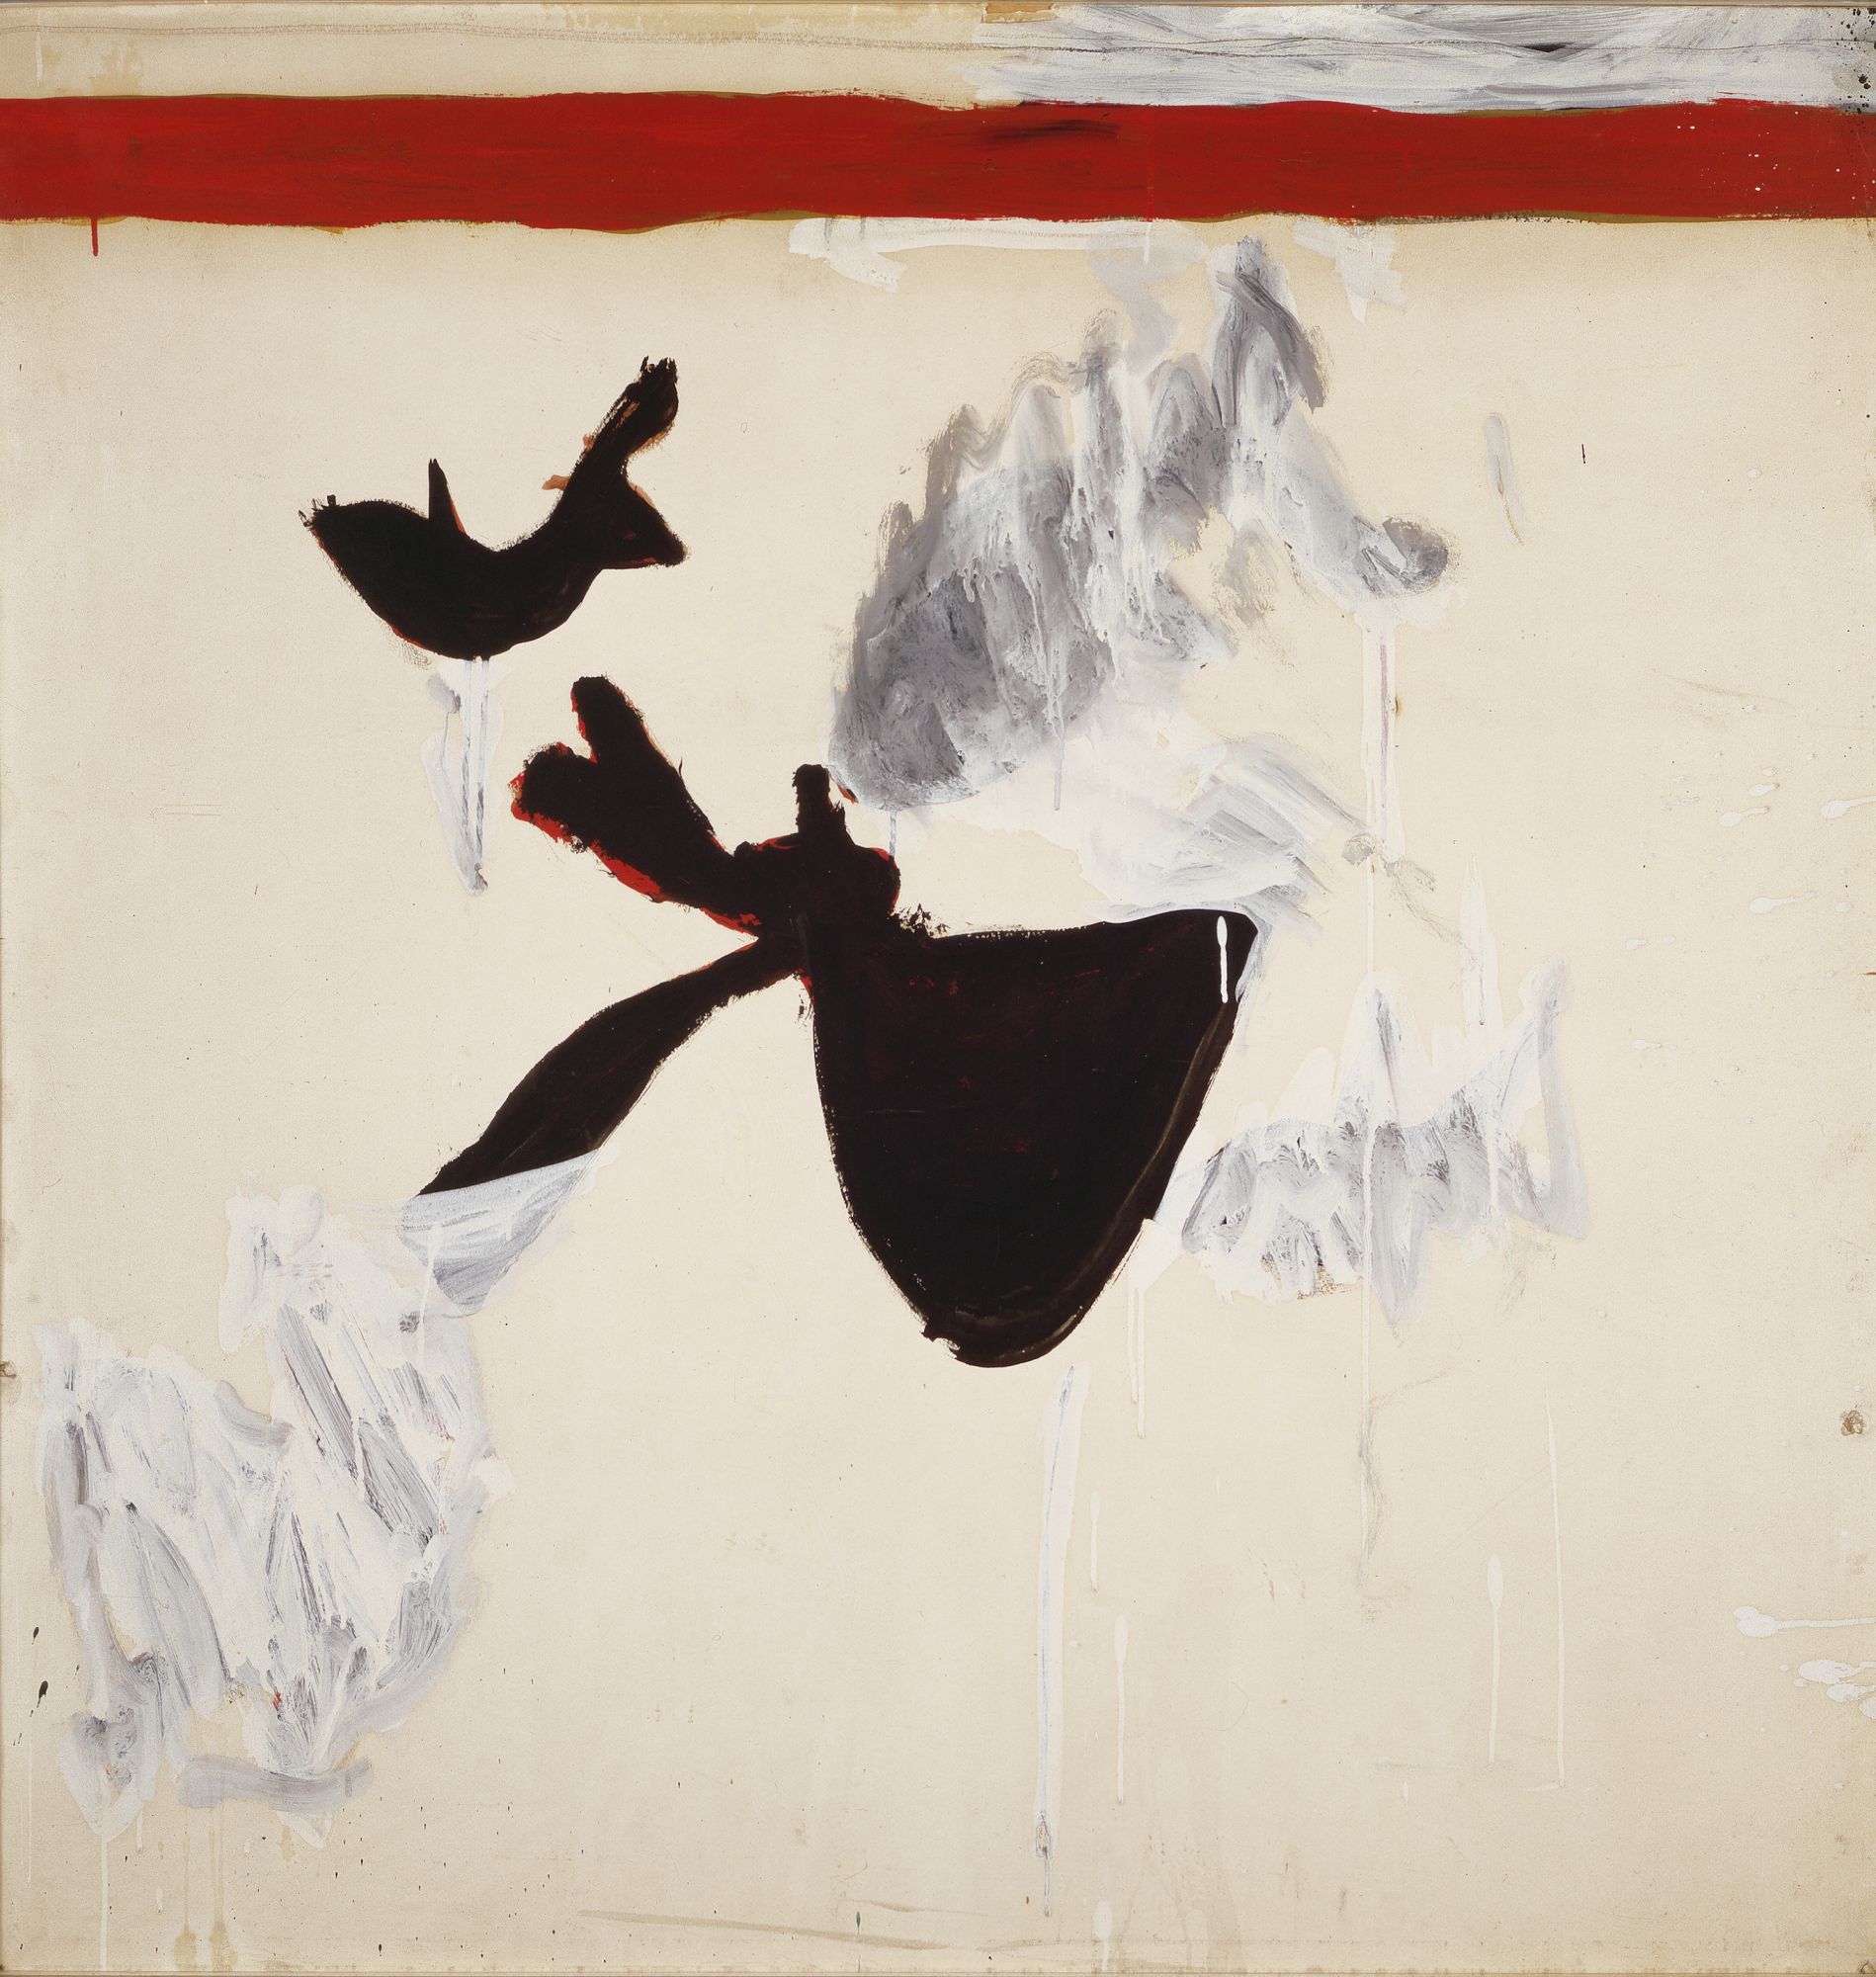 Fishes with Red Stripe, 1952. Oil on paper mounted on board, 42 ½ x 41 ¼ inches (108 x 104.8 cm)